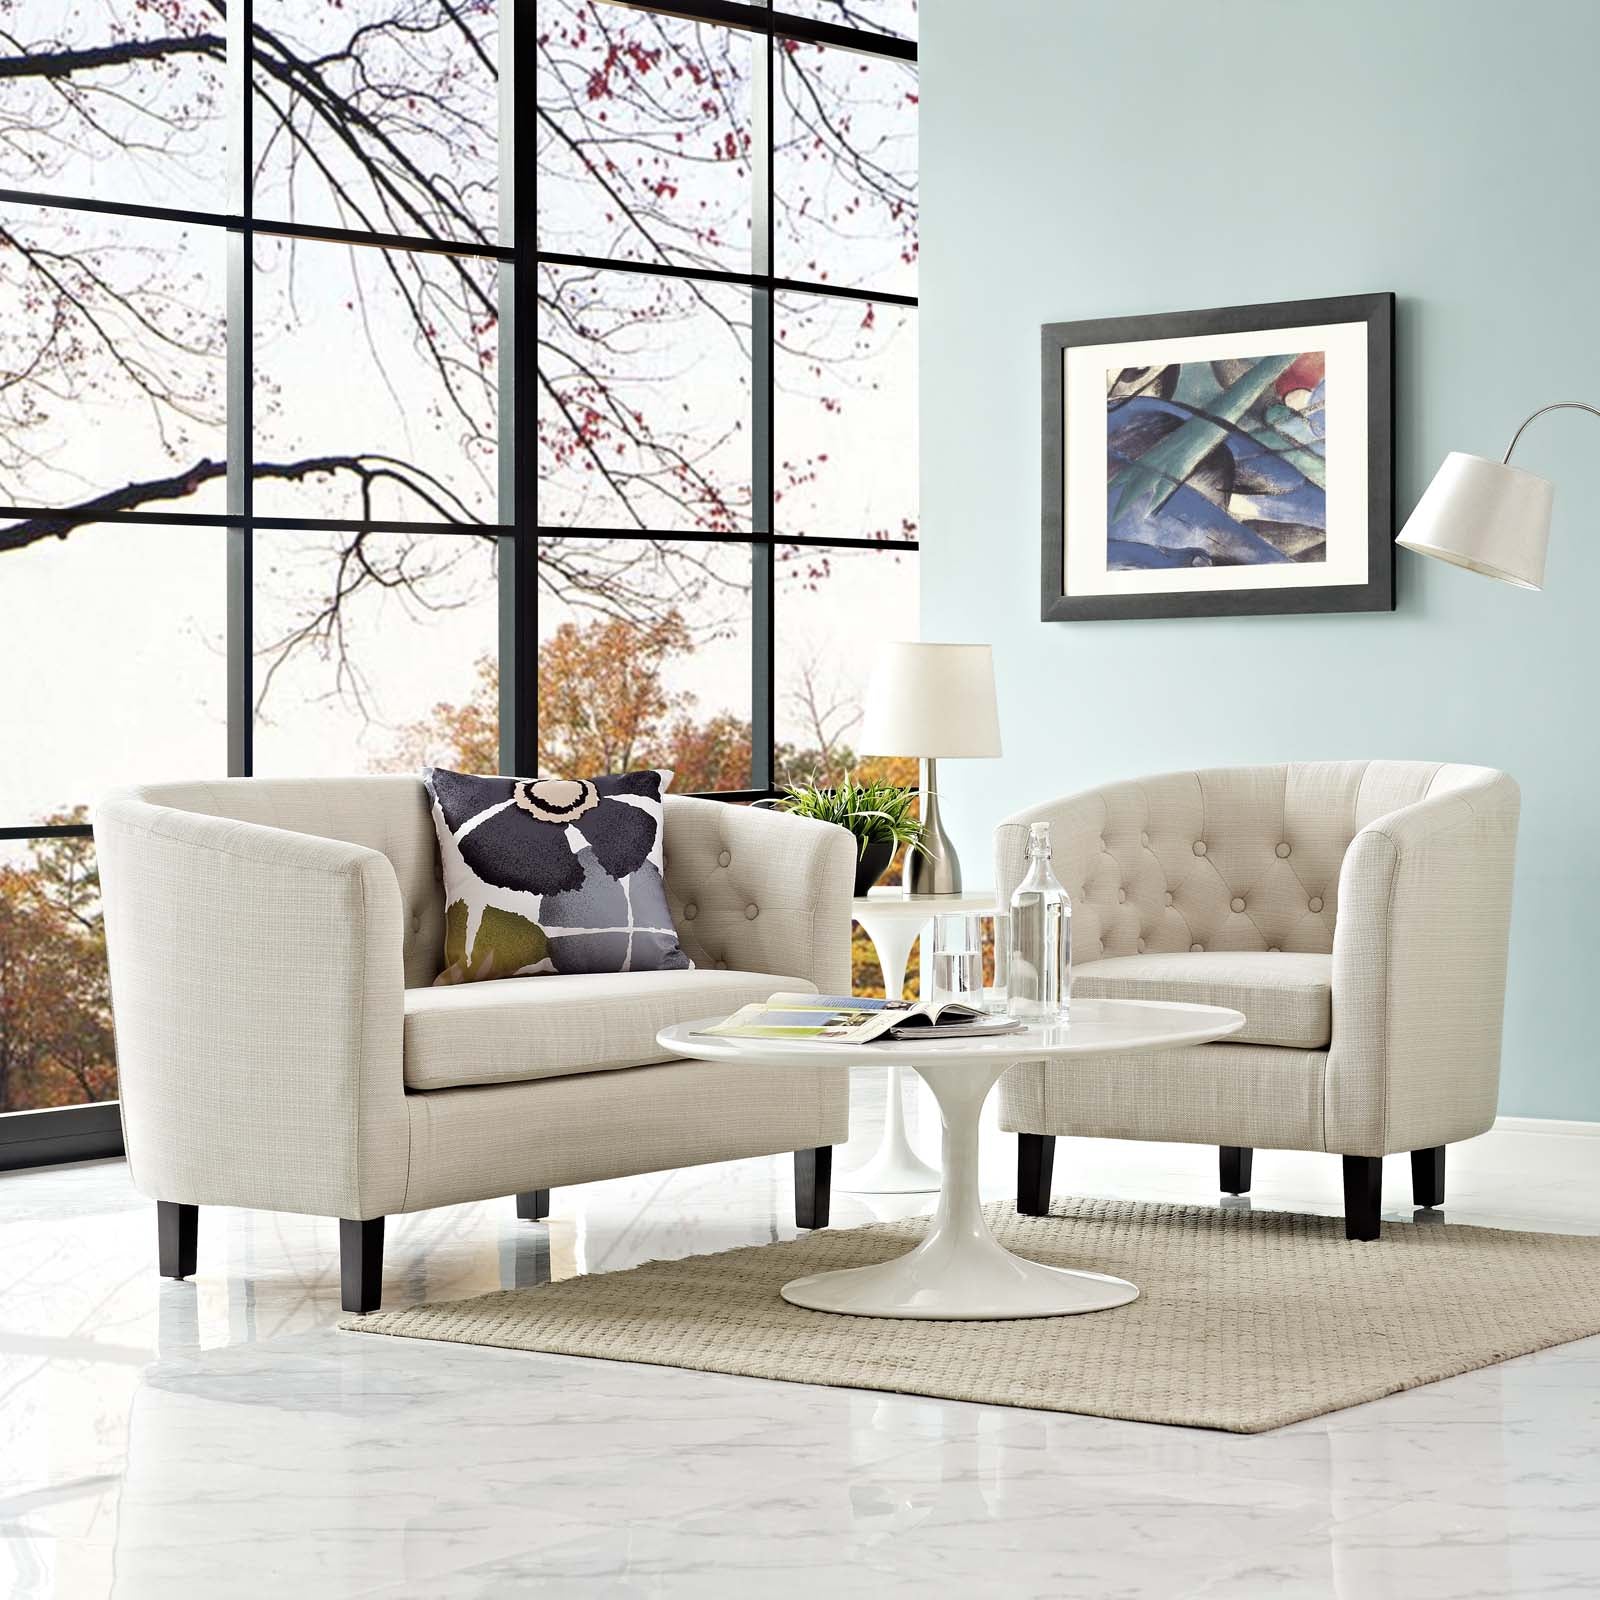 Modway Living Room Sets - Prospect 2 Piece Upholstered Fabric Loveseat and Armchair Set Beige